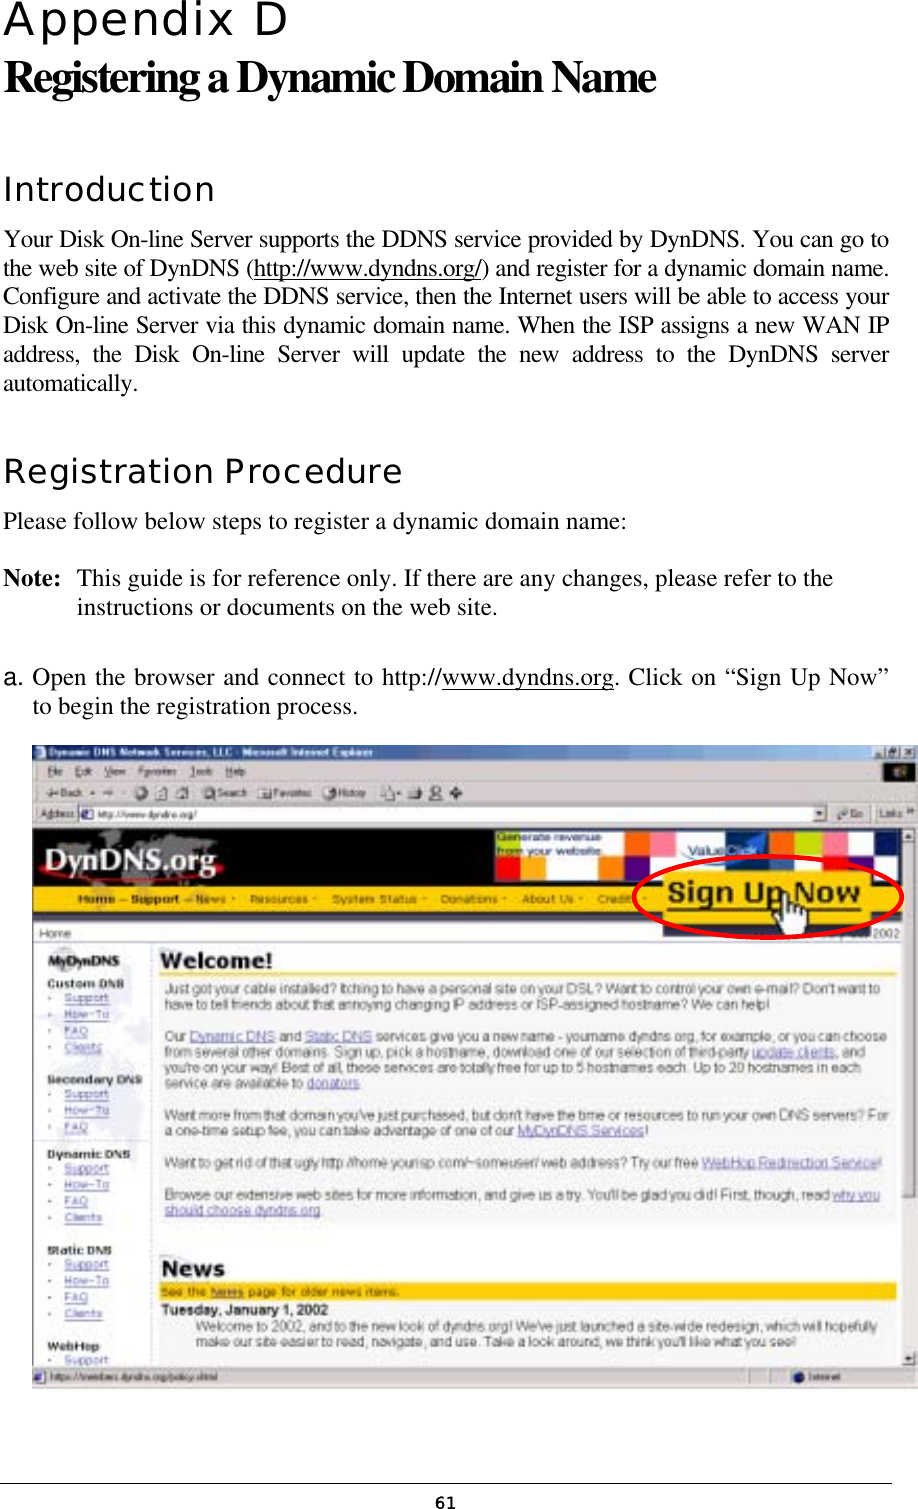   61Appendix D  Registering a Dynamic Domain Name Introduction Your Disk On-line Server supports the DDNS service provided by DynDNS. You can go to the web site of DynDNS (http://www.dyndns.org/) and register for a dynamic domain name. Configure and activate the DDNS service, then the Internet users will be able to access your Disk On-line Server via this dynamic domain name. When the ISP assigns a new WAN IP address, the Disk On-line Server will update the new address to the DynDNS server automatically. Registration Procedure Please follow below steps to register a dynamic domain name:   Note:   This guide is for reference only. If there are any changes, please refer to the instructions or documents on the web site.  a. Open the browser and connect to http://www.dyndns.org. Click on “Sign Up Now” to begin the registration process.  